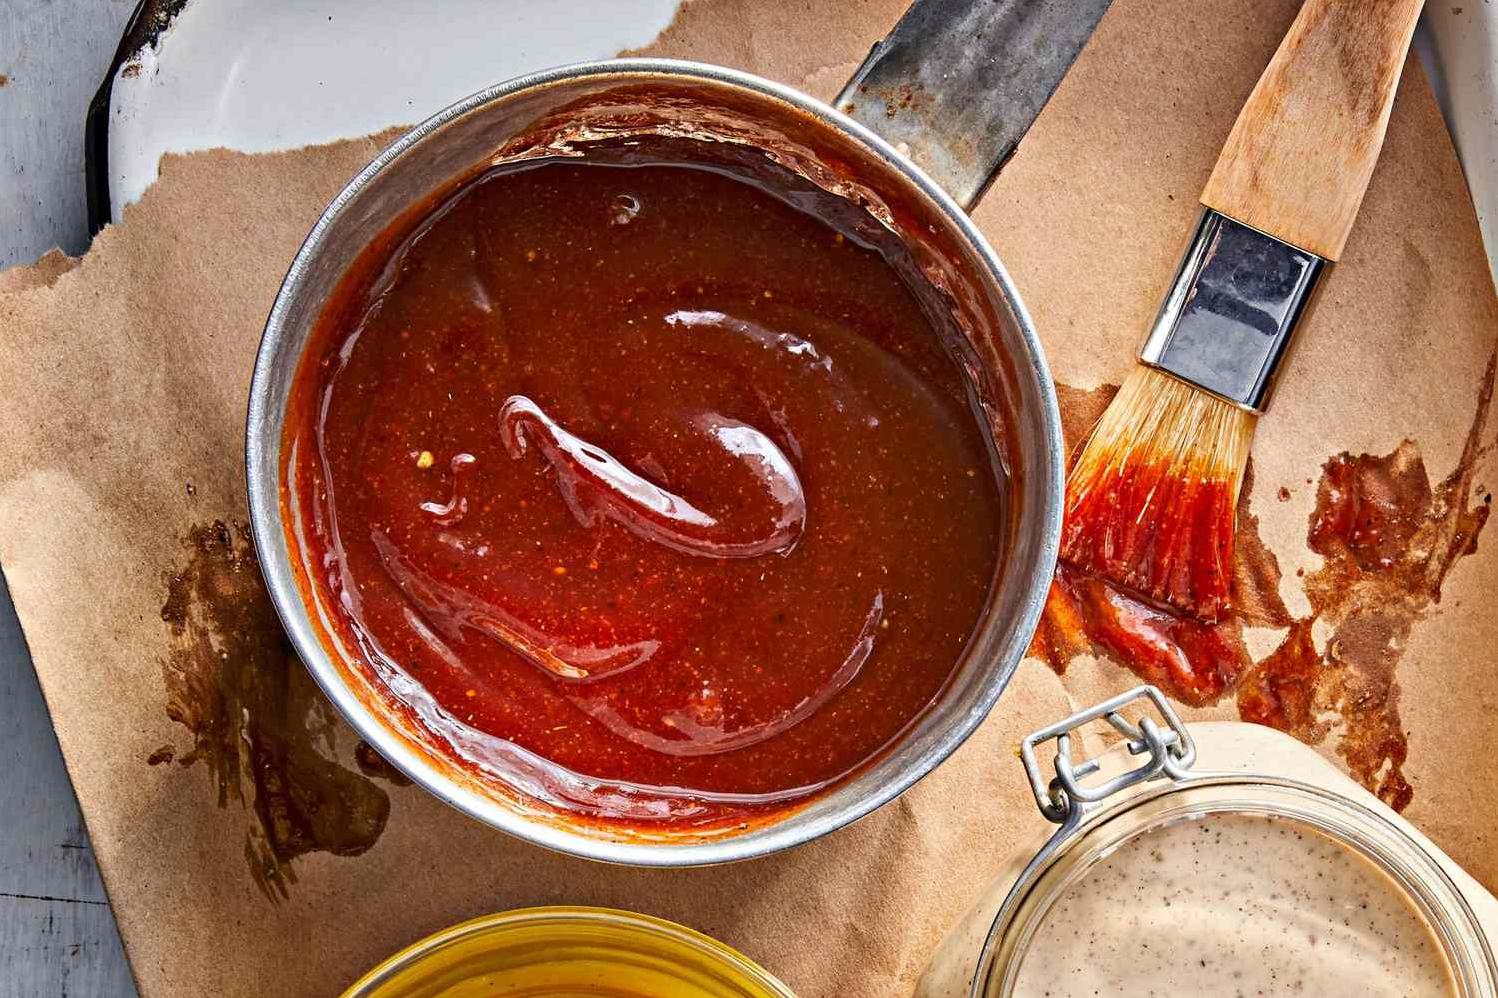  Make your BBQ spread stand out with this special Southern sauce.